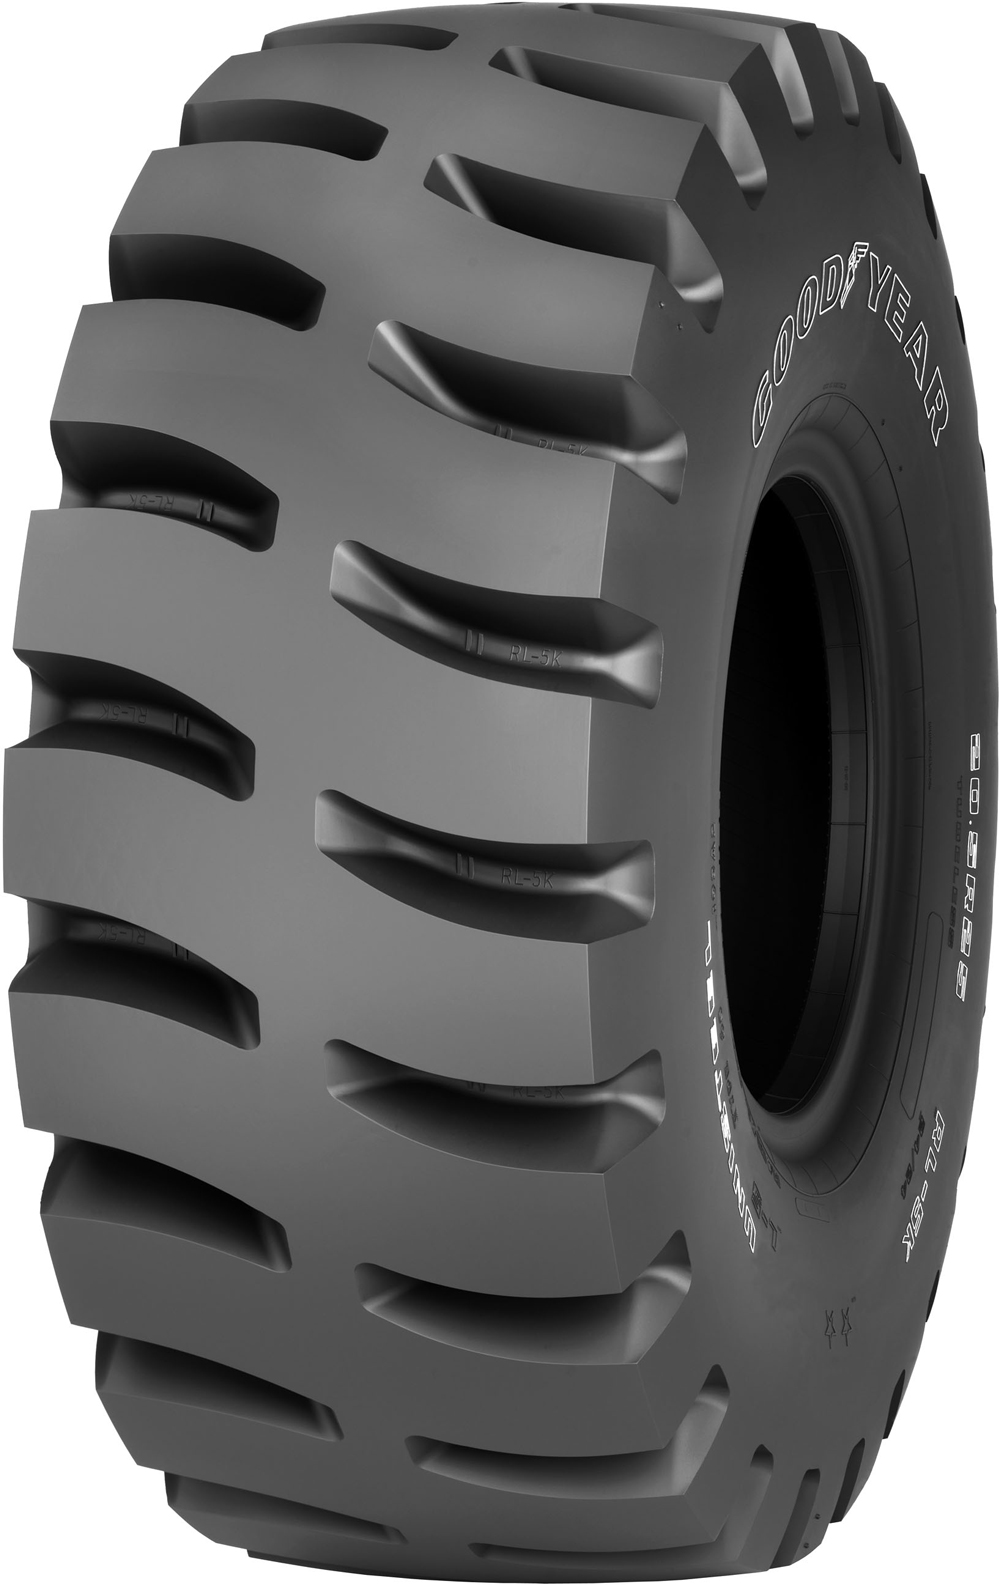 product_type-industrial_tires GOODYEAR RL-5K TL 29.5 R25 216A2